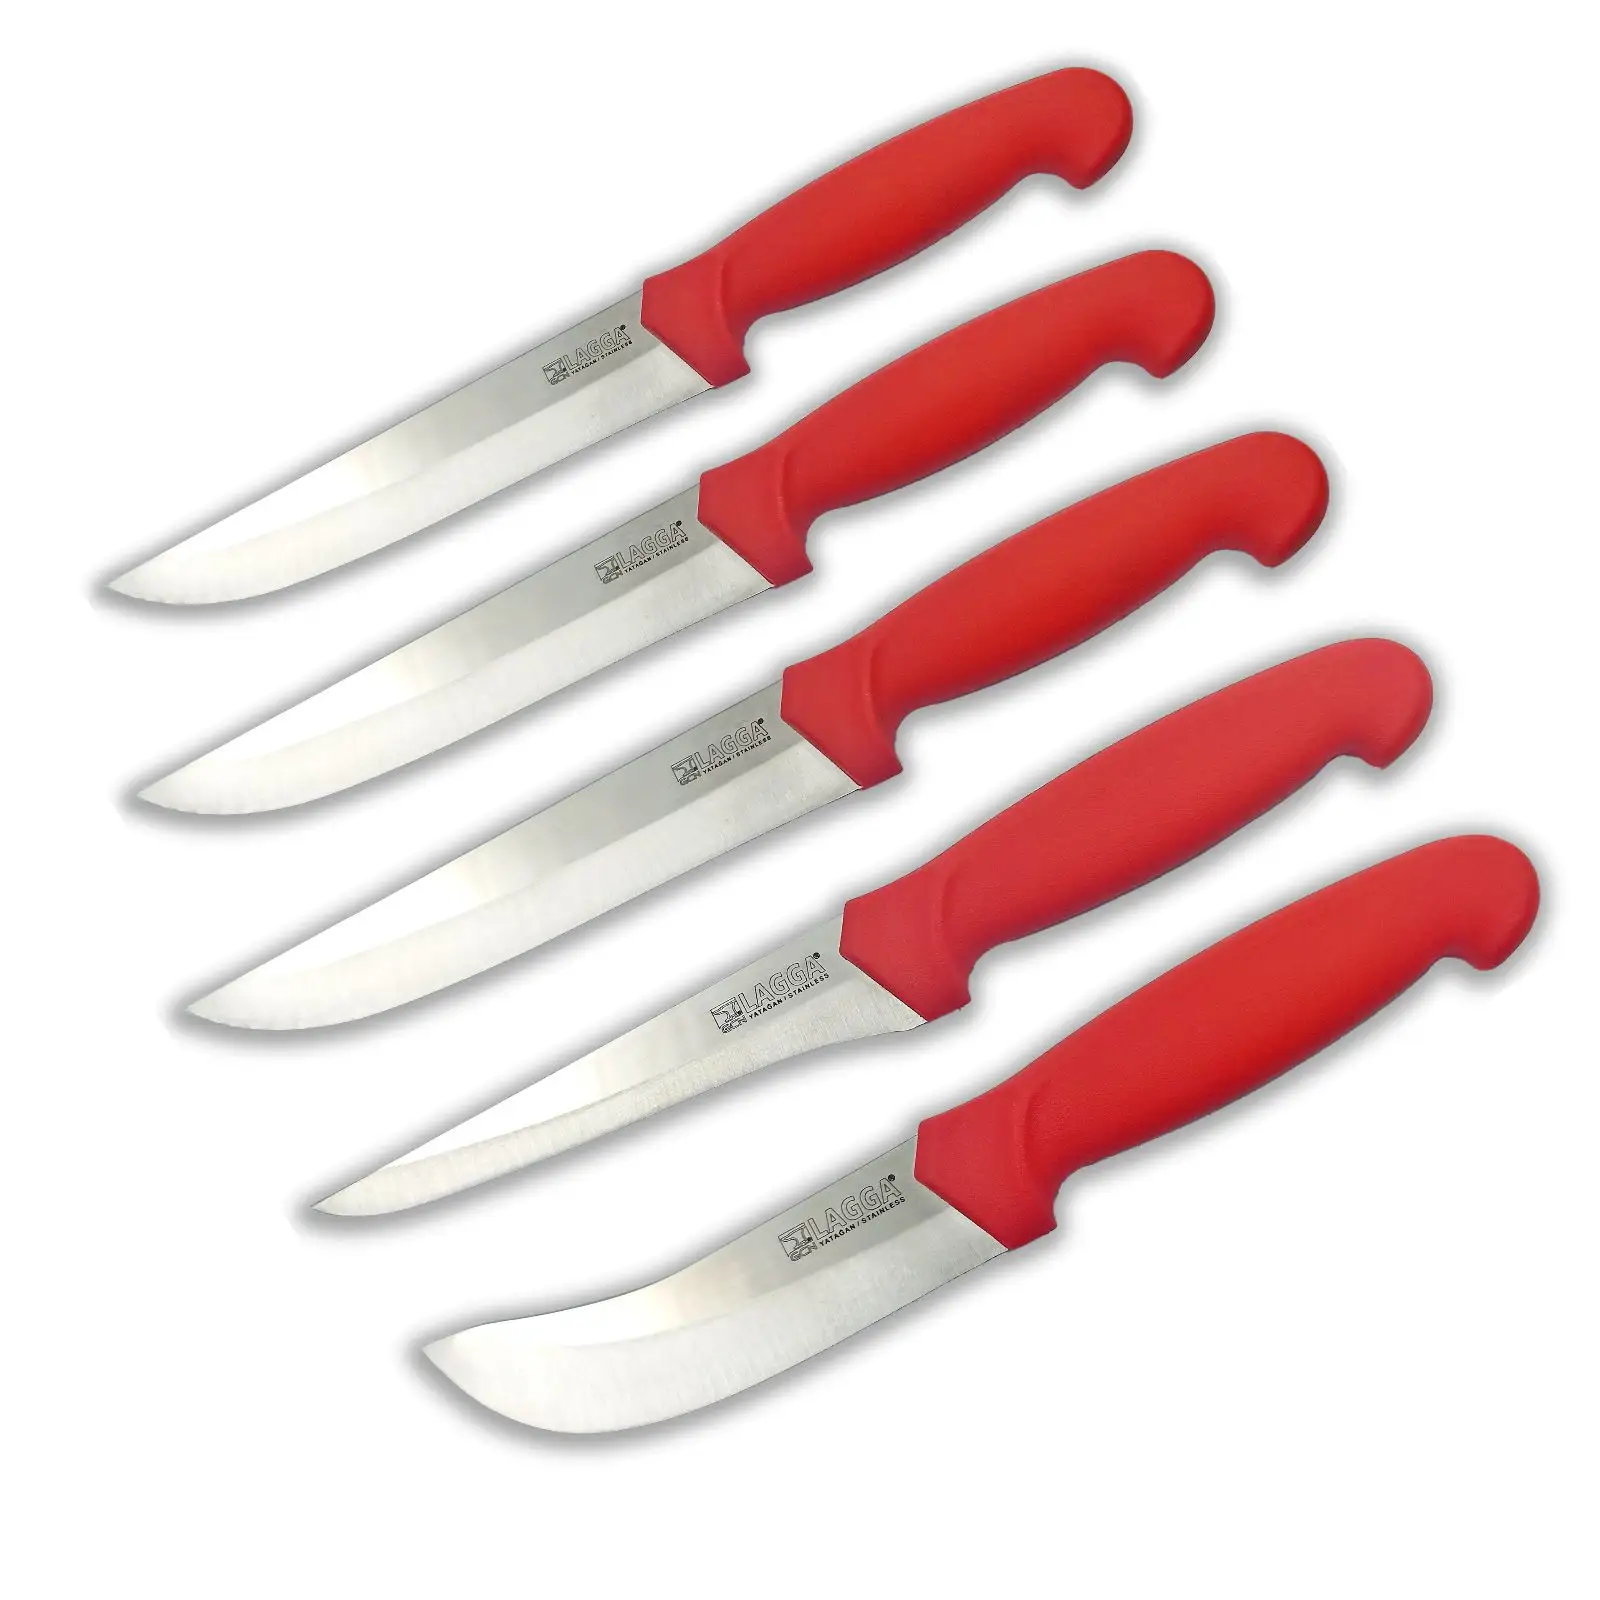 Best Price 5 Pcs Kitchen Knife Set with Ergonomic Red Plastic Handle and 4116 Stainless Steel Blade ks1050